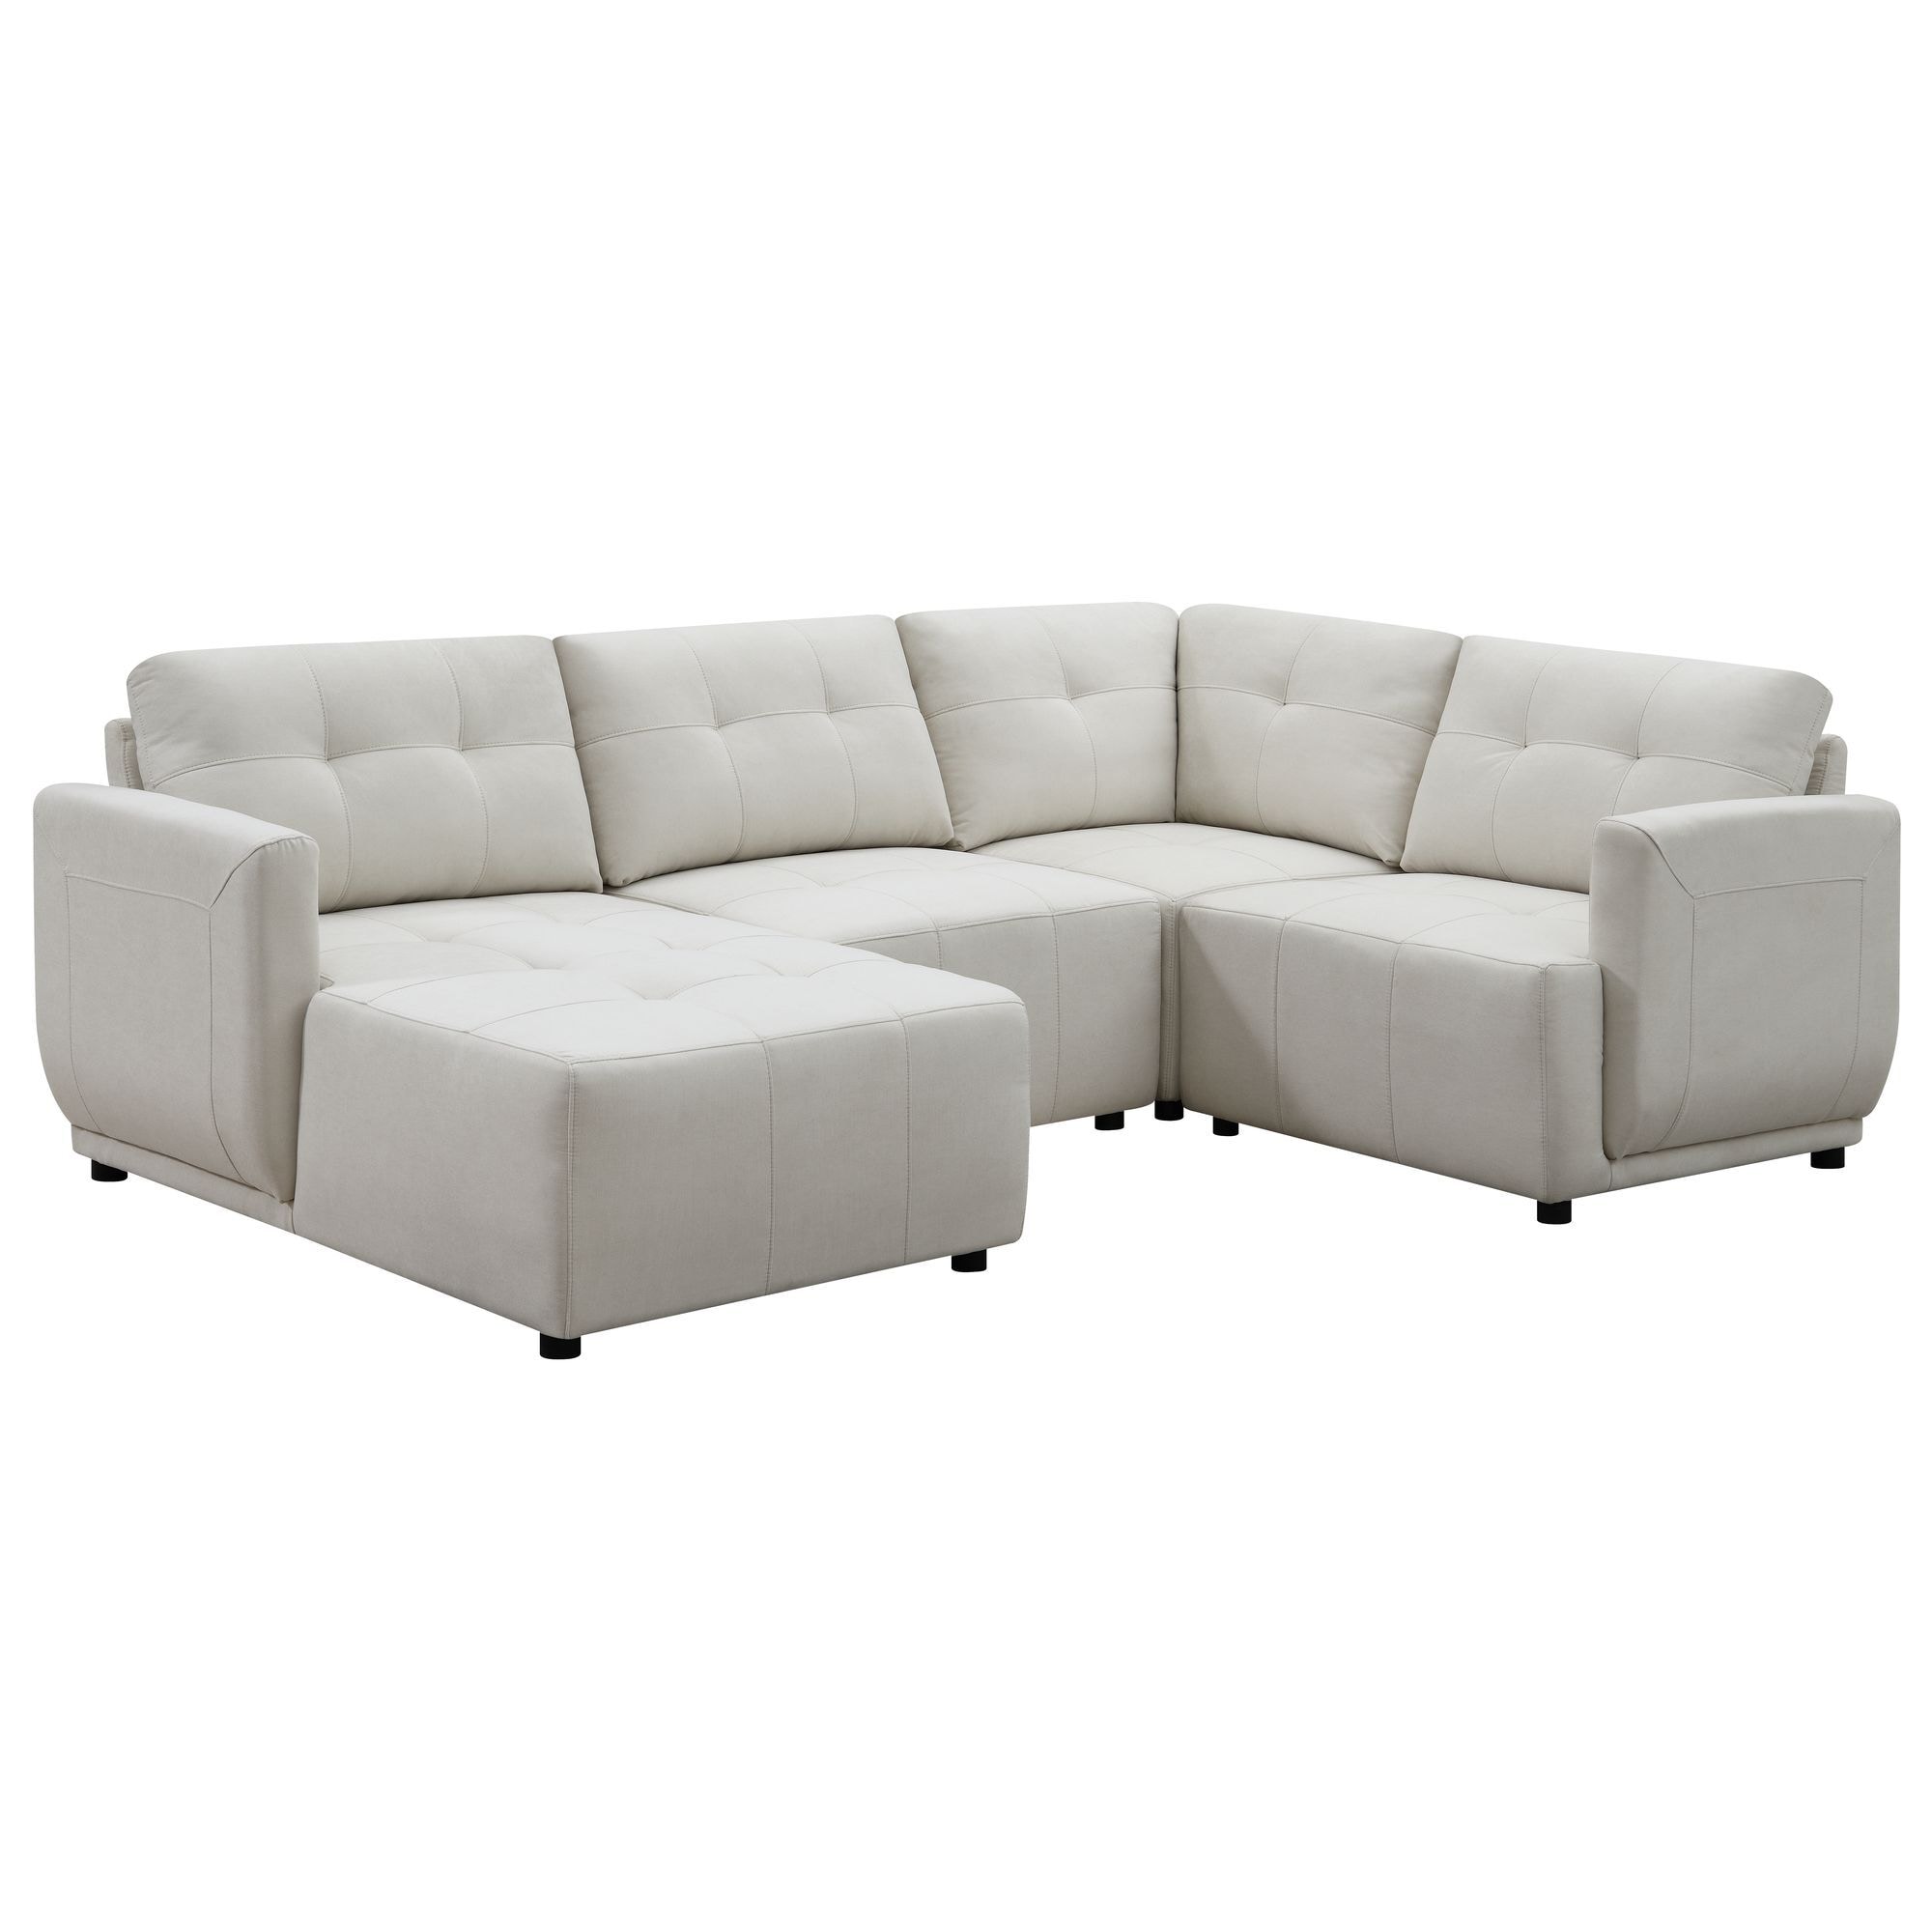 Oorzaak Subtropisch natuurlijk Picket House Furnishings Gianni Modern Natural Polyester/Blend Sectional in  the Couches, Sofas & Loveseats department at Lowes.com